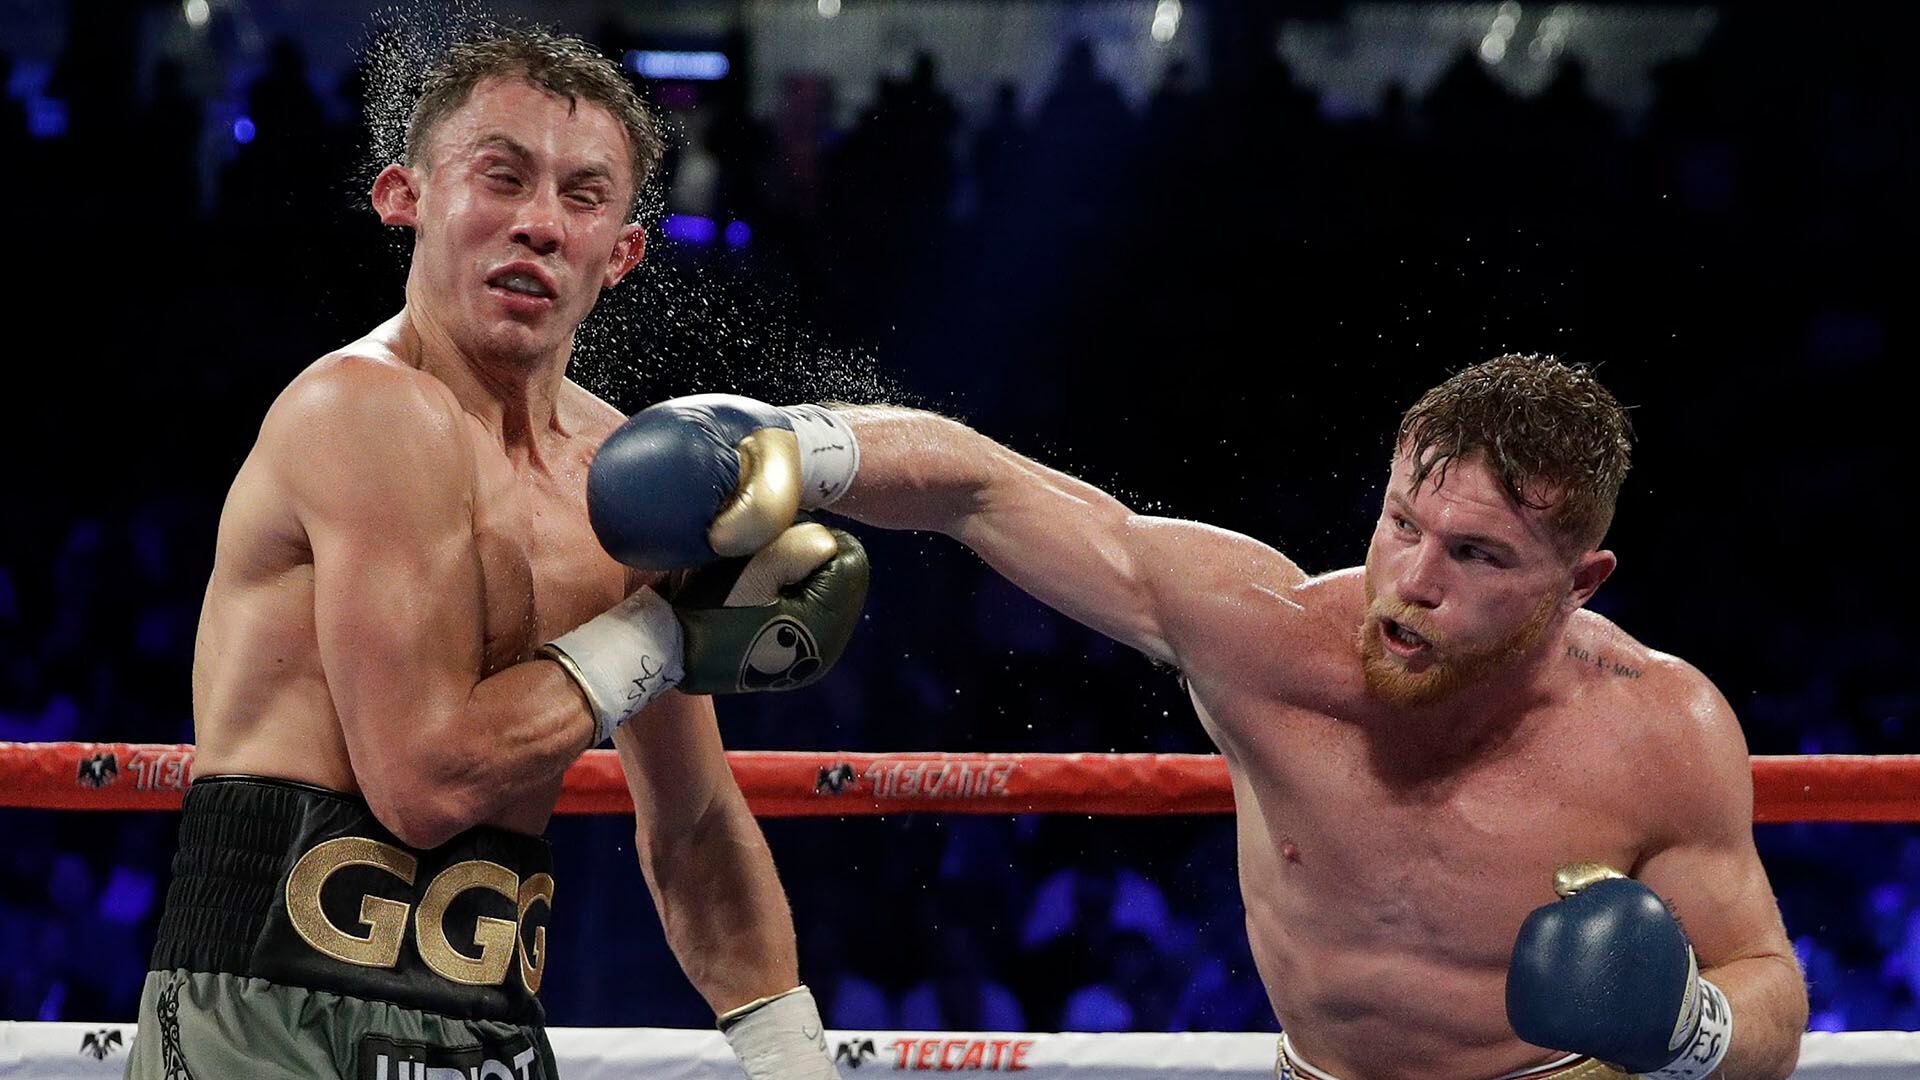 Canelo Alvarez, right, connects with a right to Gennady Golovkin during a middleweight title fight Saturday, Sept. 16, 2017, in Las Vegas. (AP Photo/John Locher)